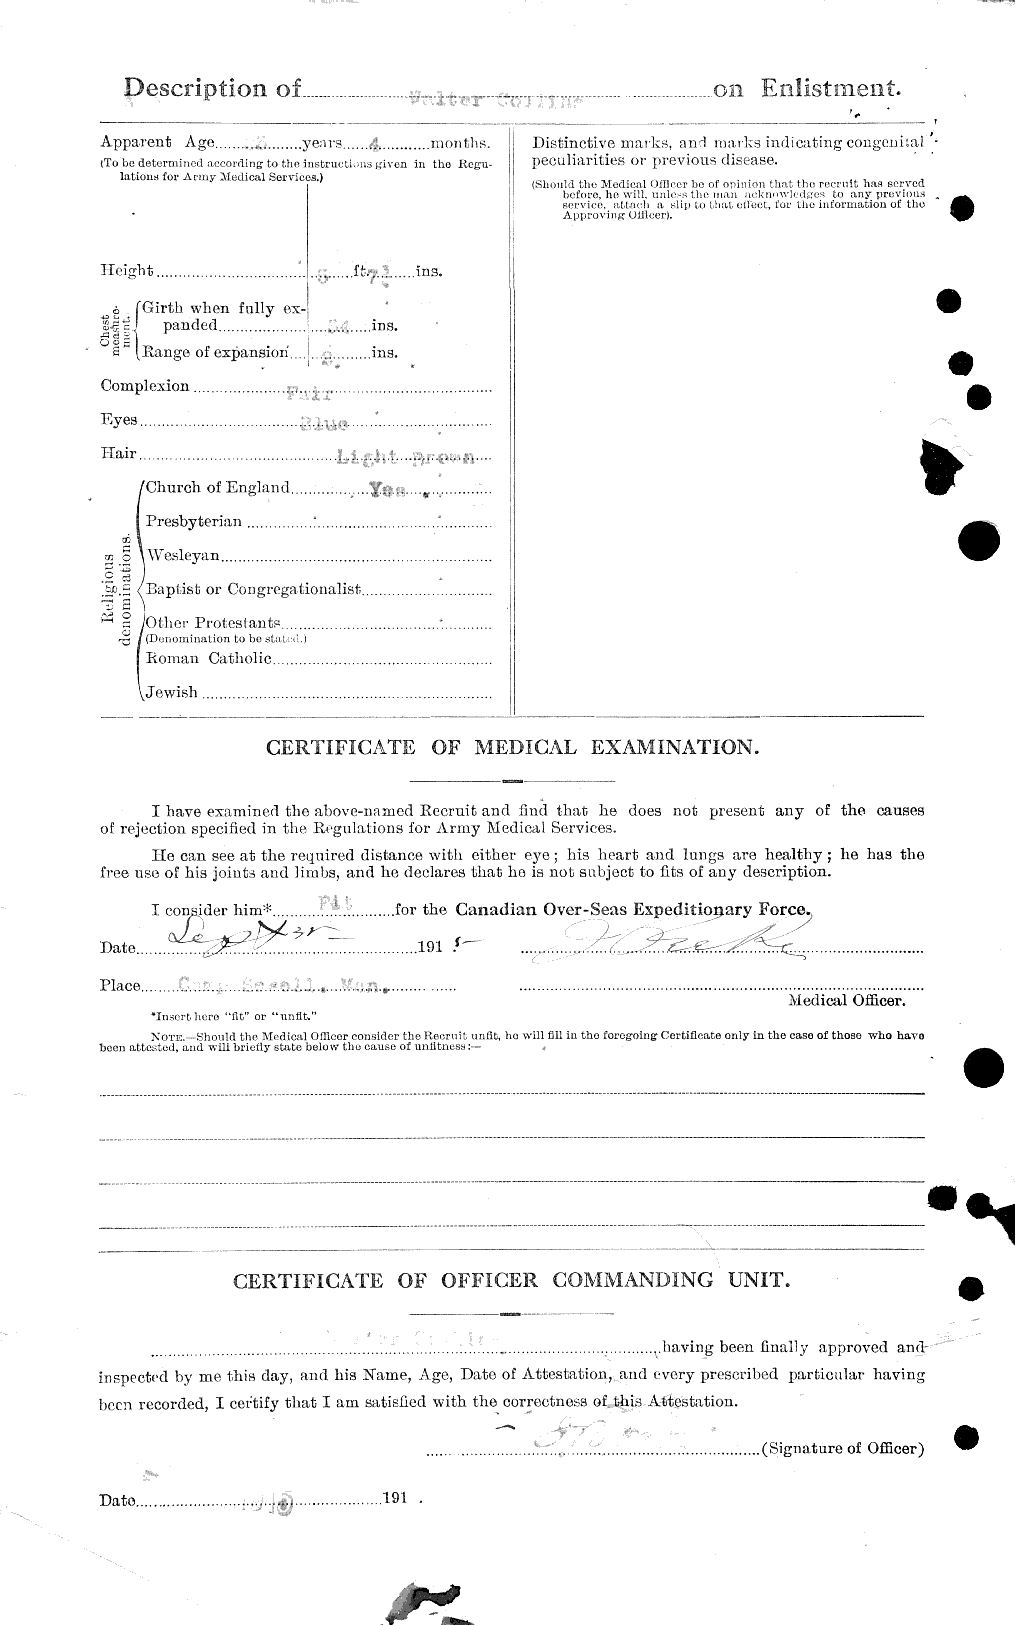 Personnel Records of the First World War - CEF 040688b